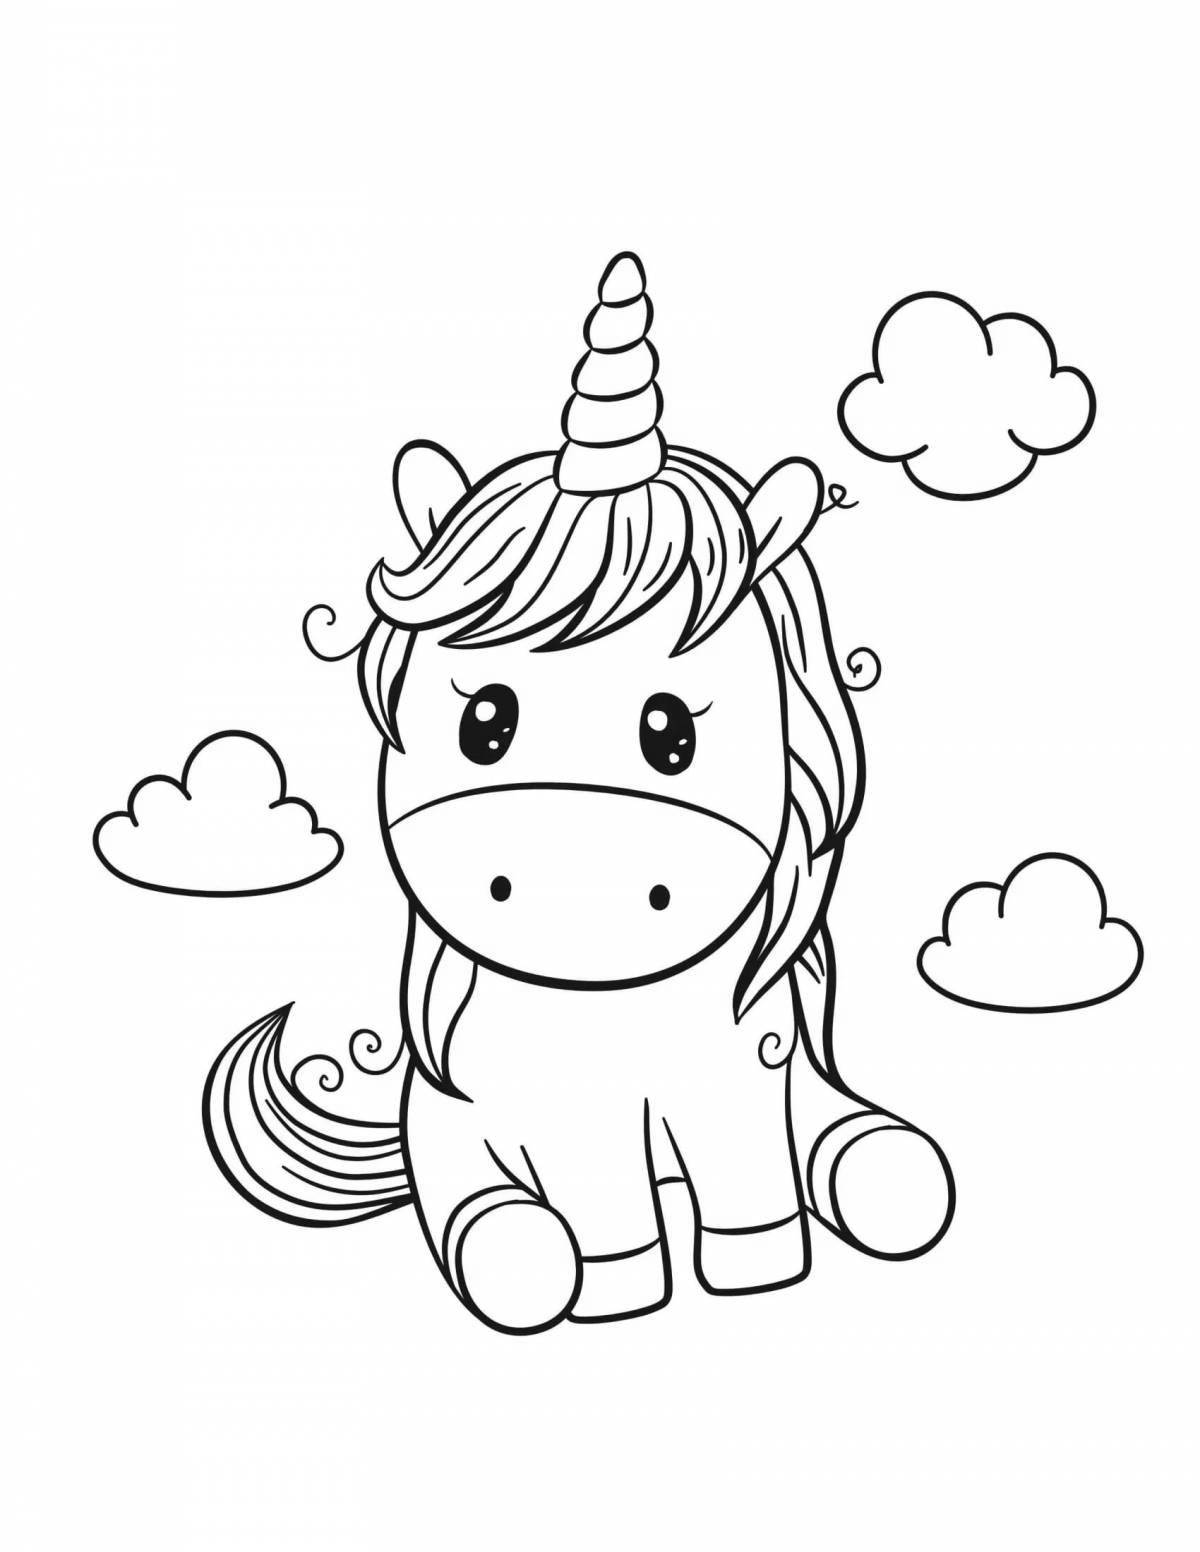 Unicorn rainbow coloring book for kids